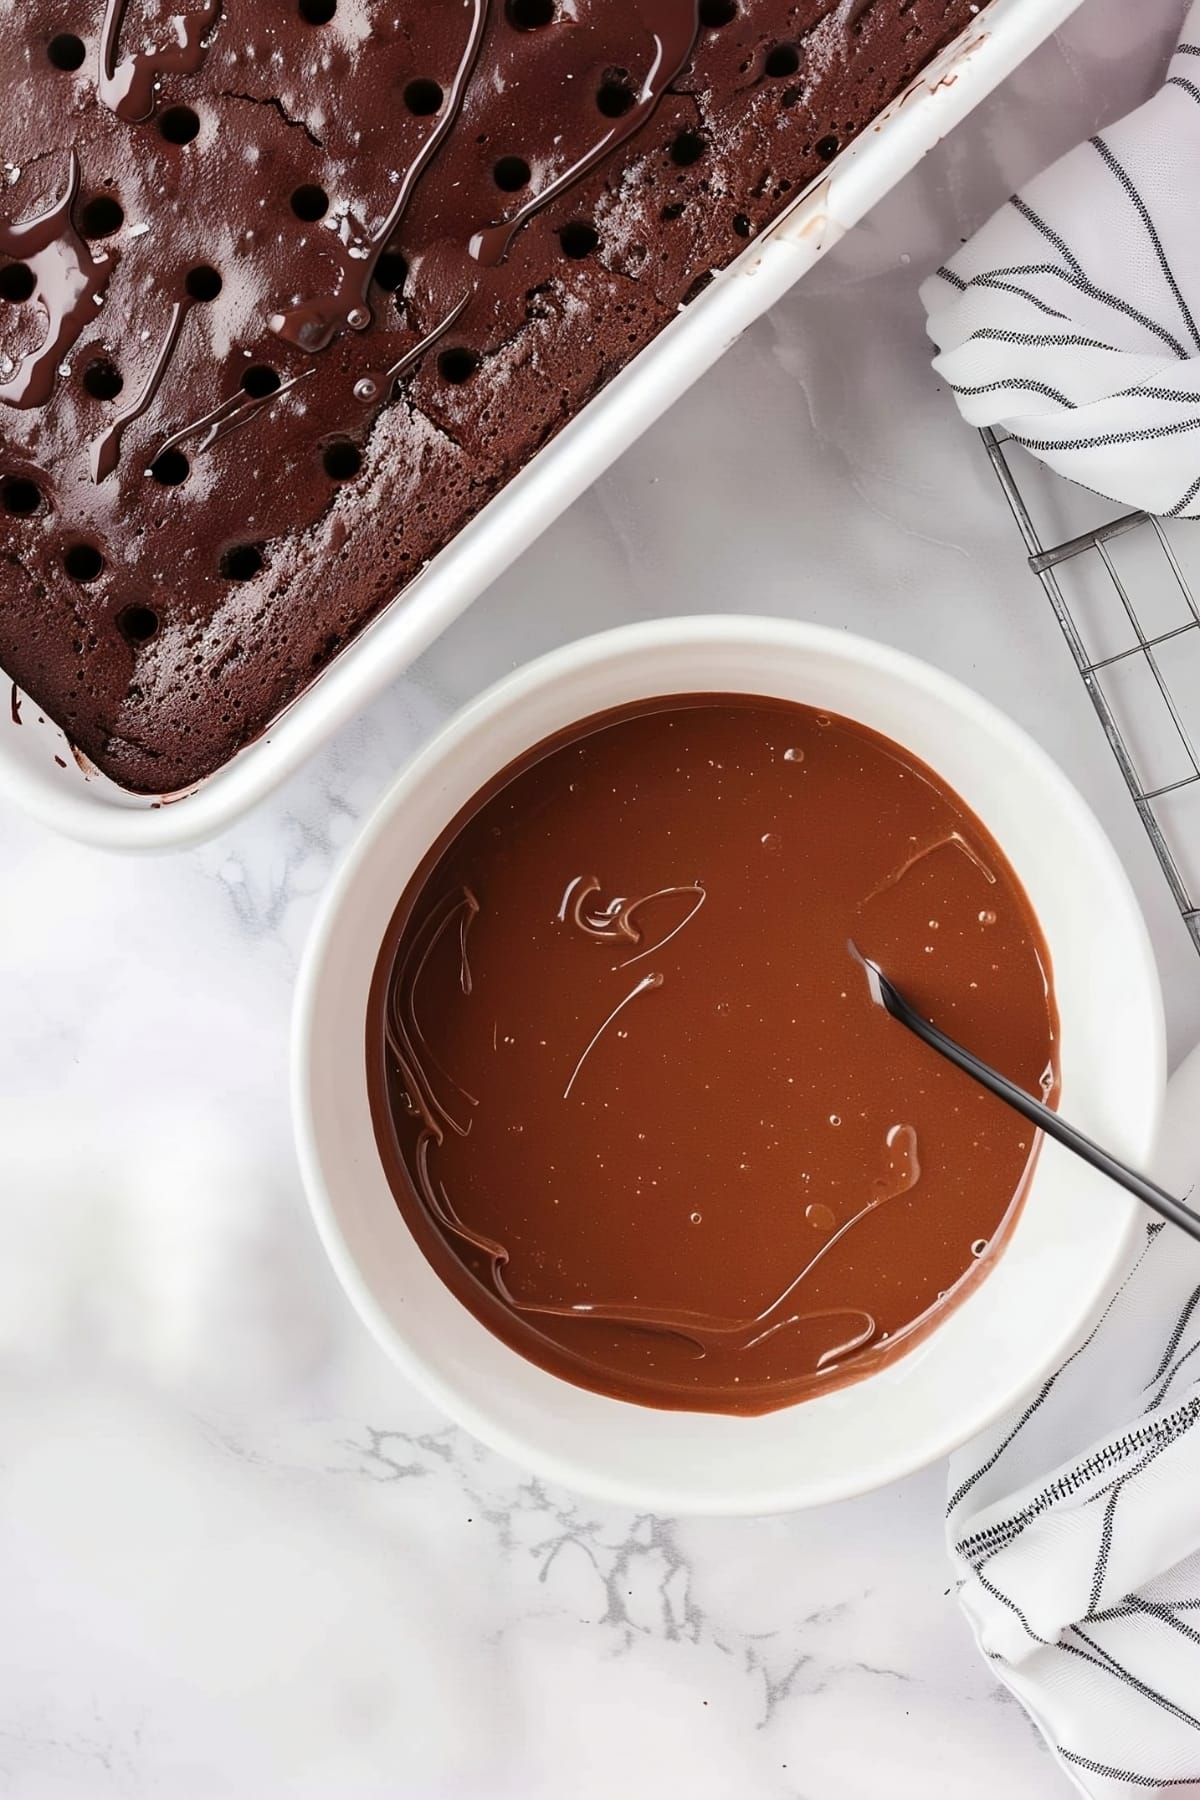 Overhead view of melted chocolate in a bowl with chocolate cake with holes on the side on a white marble table